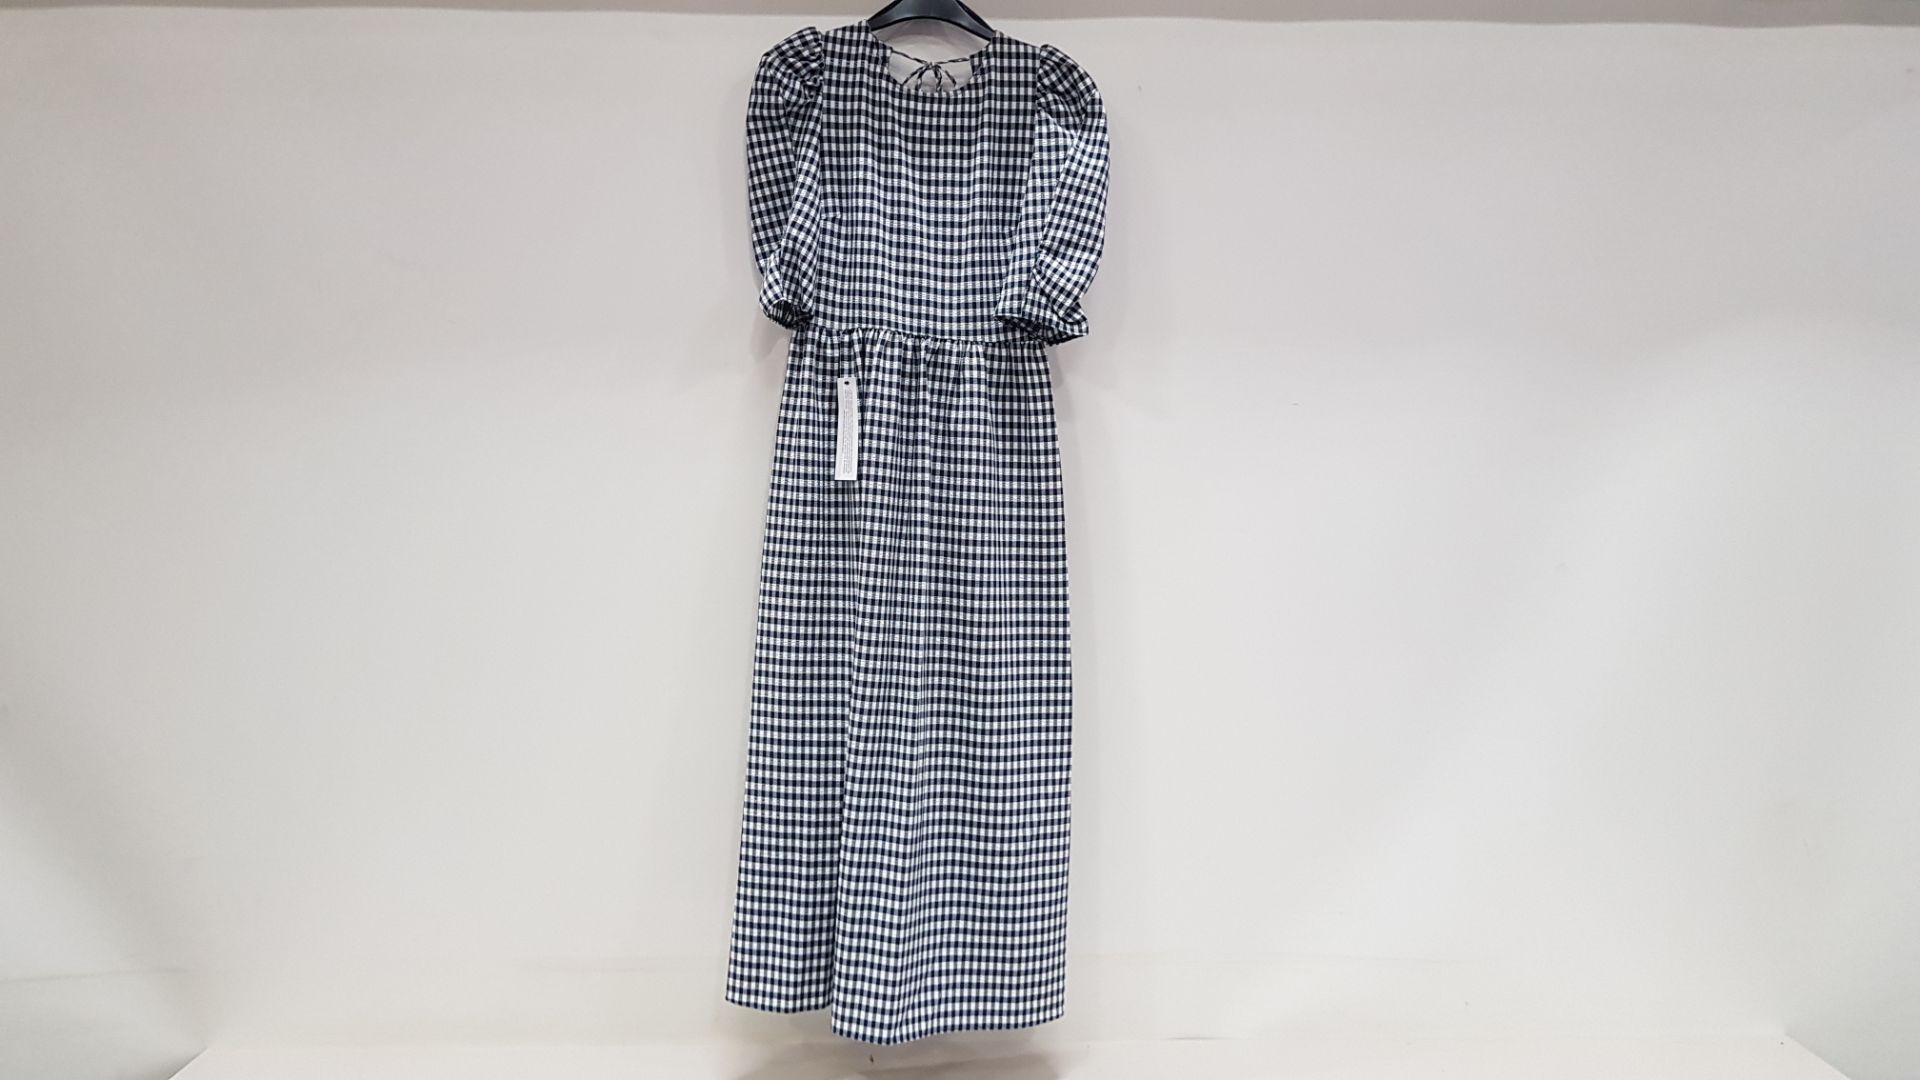 10 X BRAND NEW TOPSHOP BLUE CHEQUERED LONG DRESSES UK SIZE 8 AND 6 RRP-£45.00 TOTAL RRP-£ 450.00